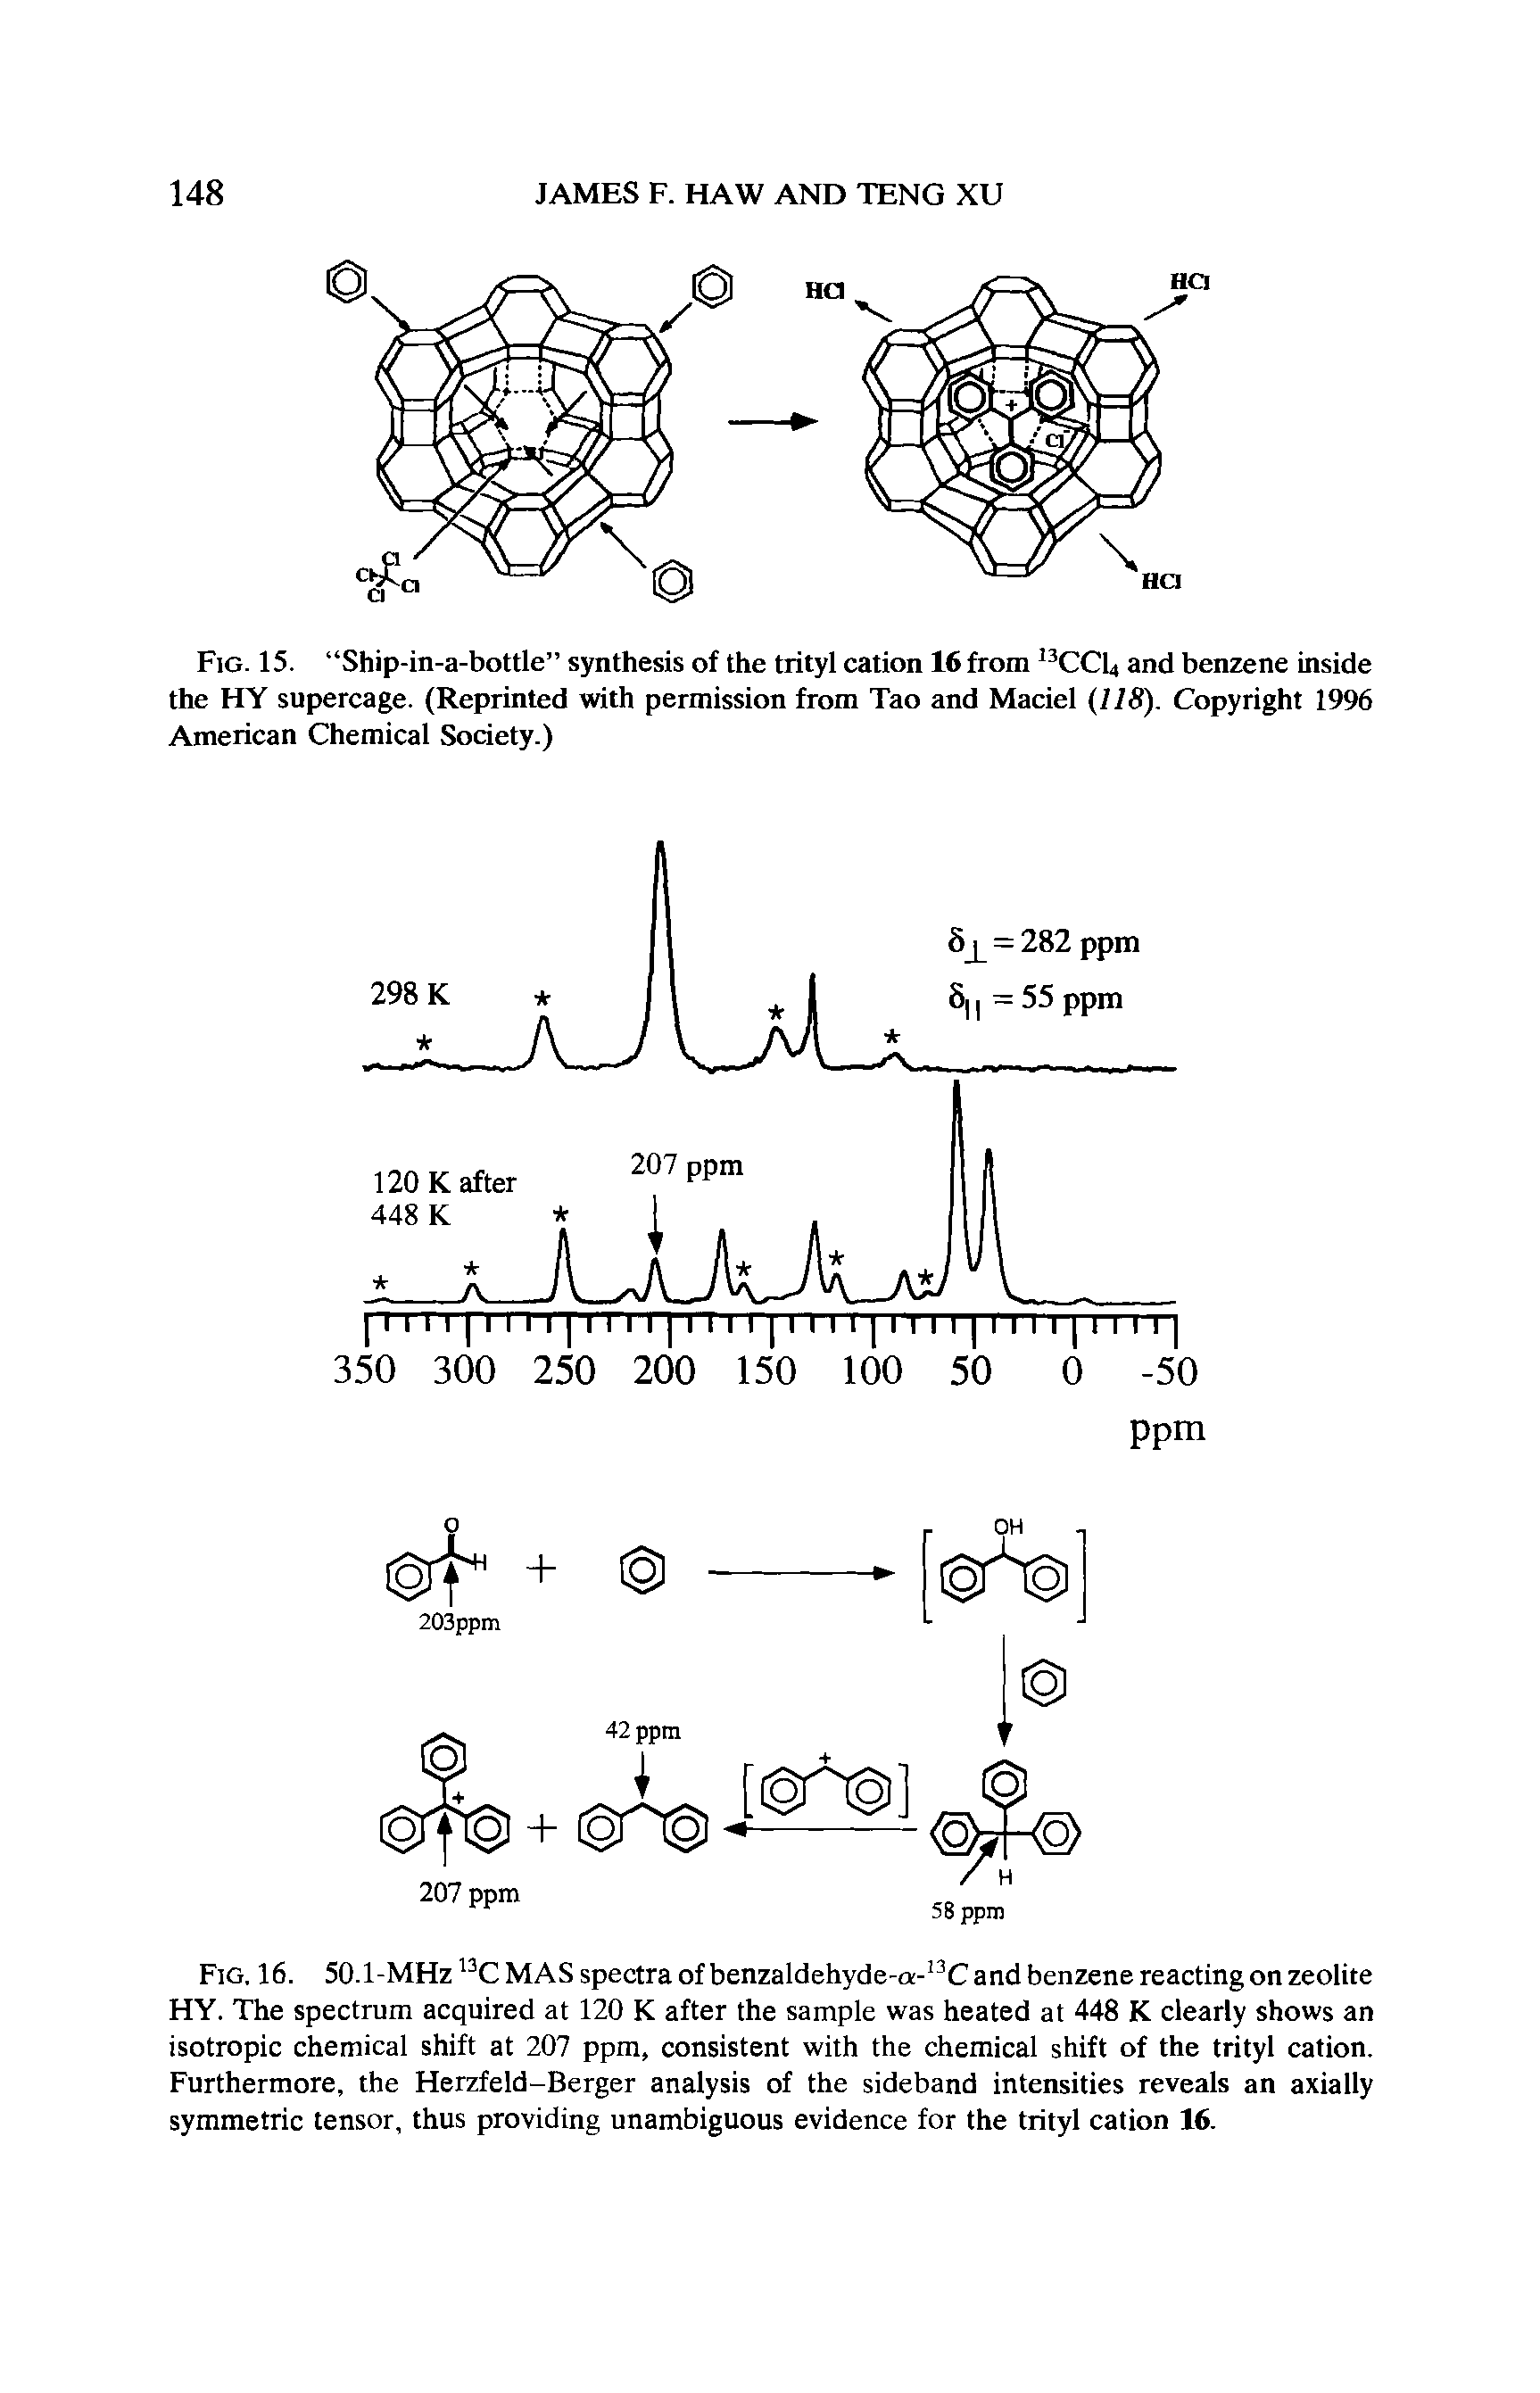 Fig. 15. Ship-in-a-bottle synthesis of the trityl cation 16 from 13CCU and benzene inside the HY supercage. (Reprinted with permission from Tao and Maciel (118). Copyright 1996 American Chemical Society.)...